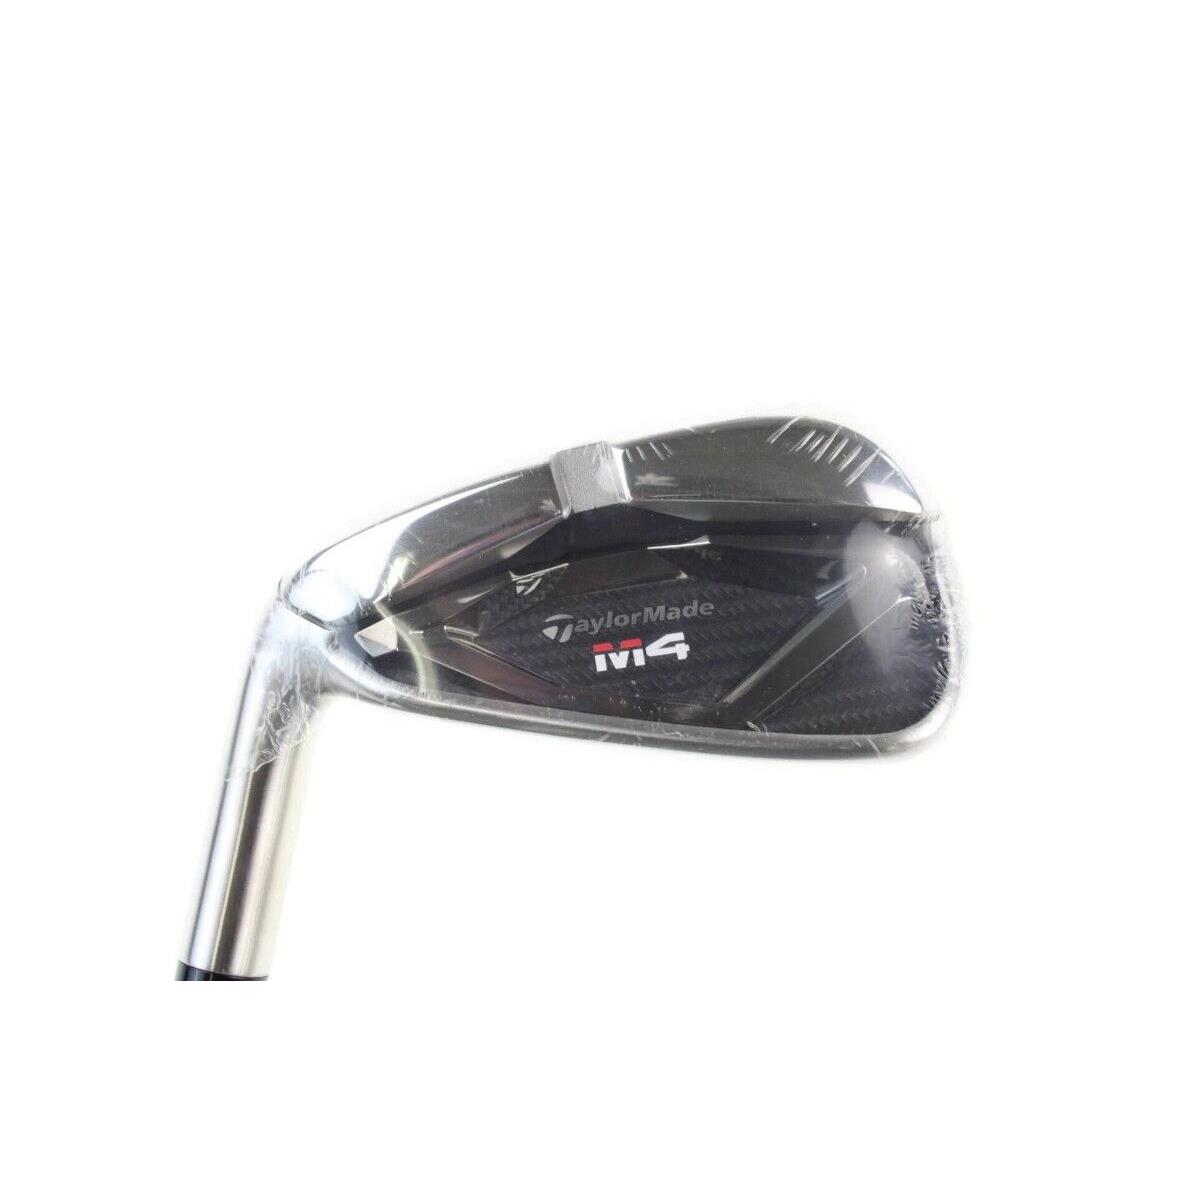 Taylor Made M4 2021 Iron Set Left Graphite Regular 5-PW and AW